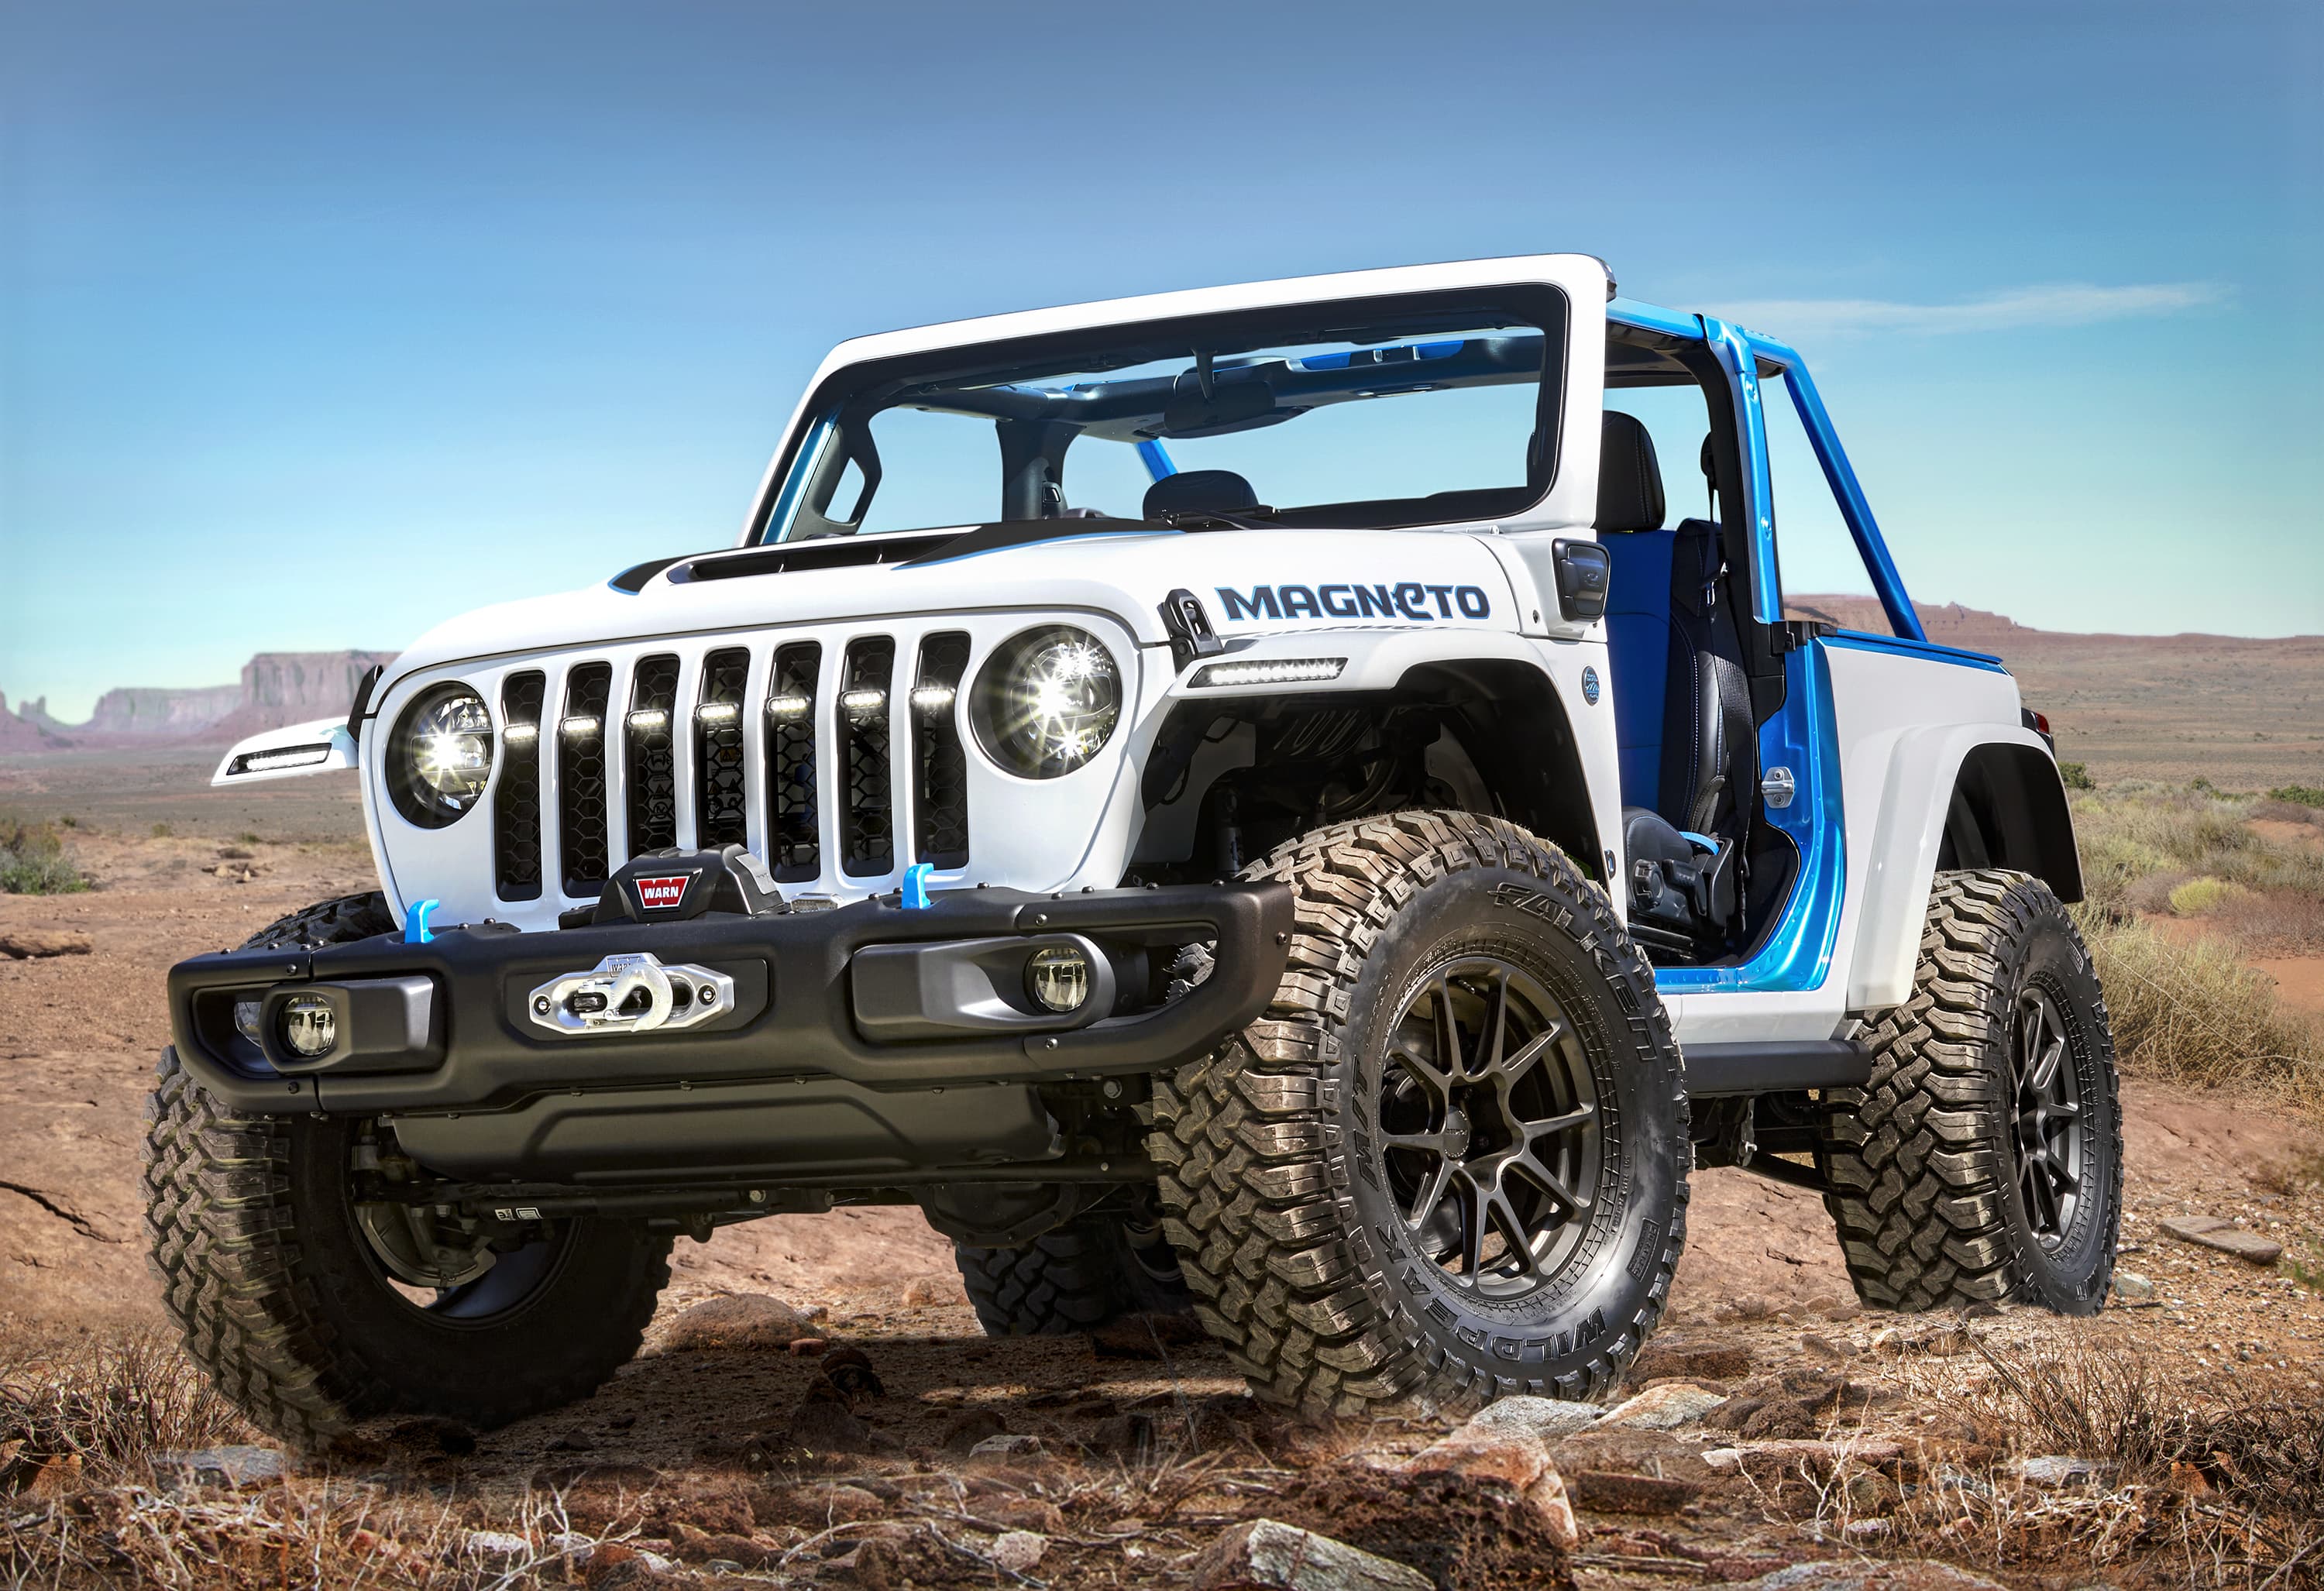 Jeep unveils a fully electric Wrangler concept SUV